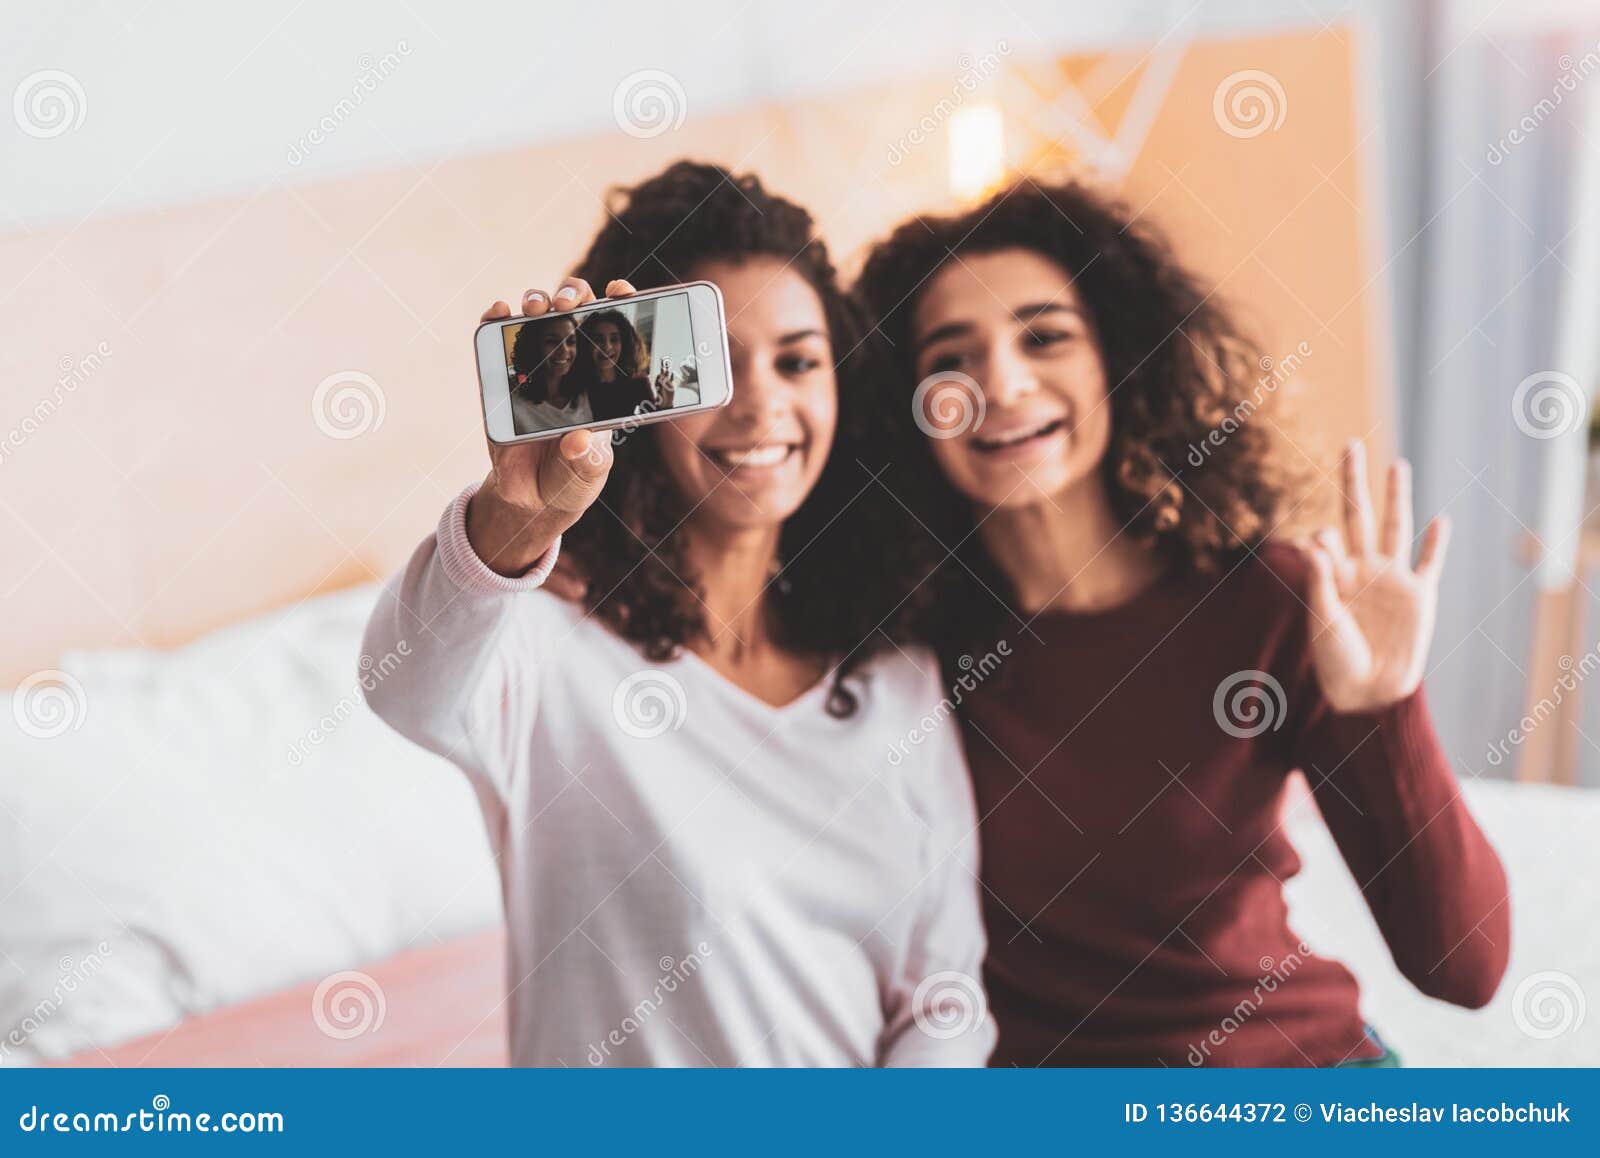 Two Attractive Friends Making Memorable Photo Stock Photo - Image of ...